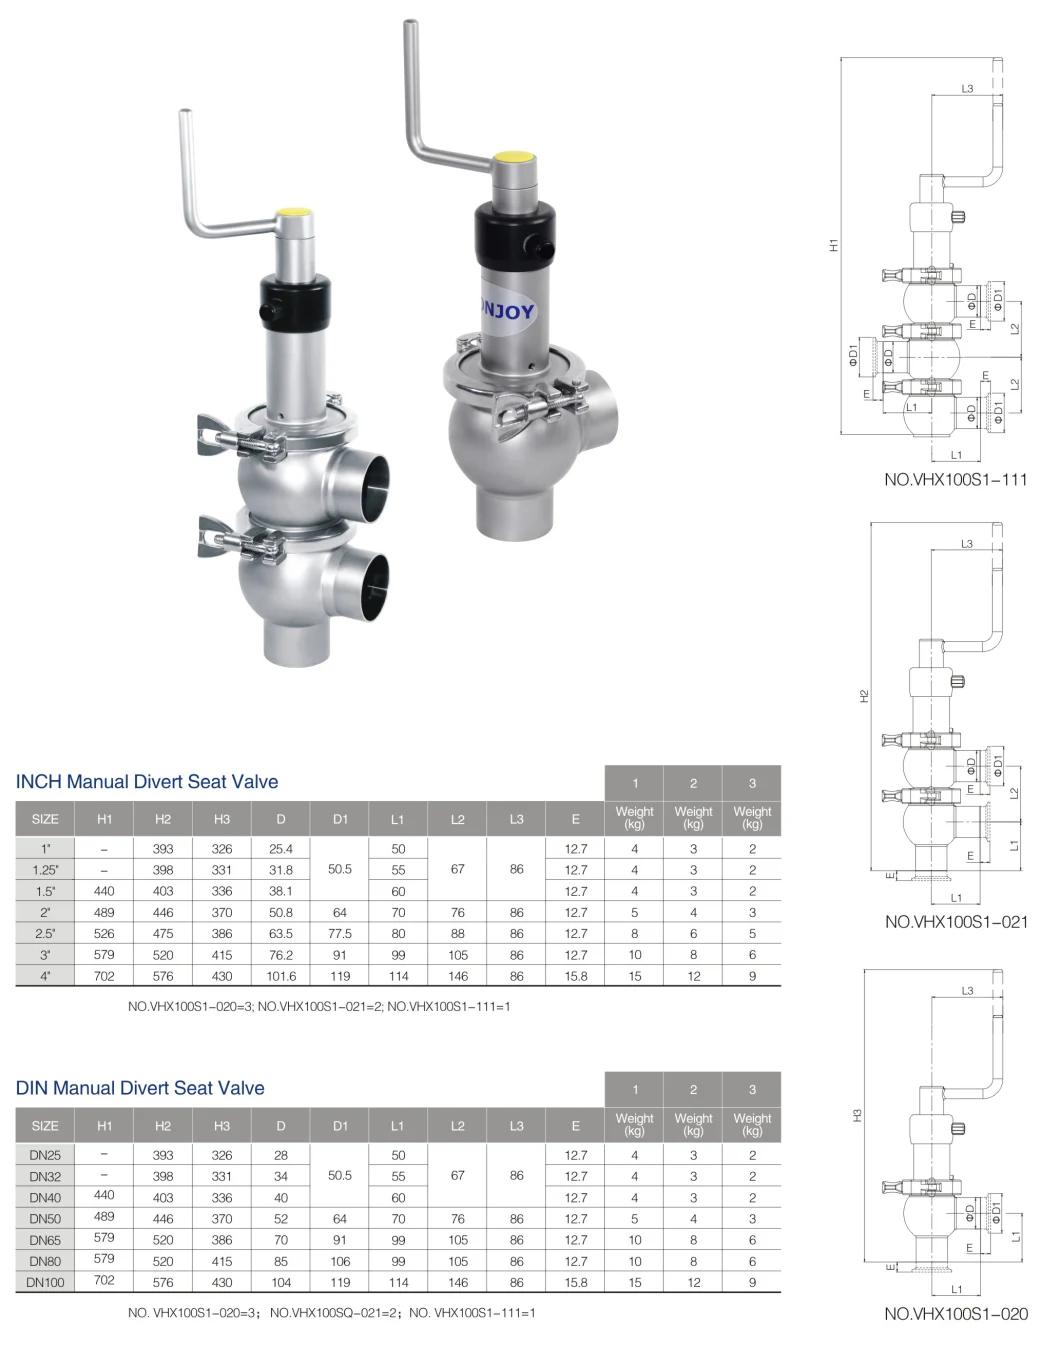 3A Certified Hygienic Shut-off and Diverter Valve